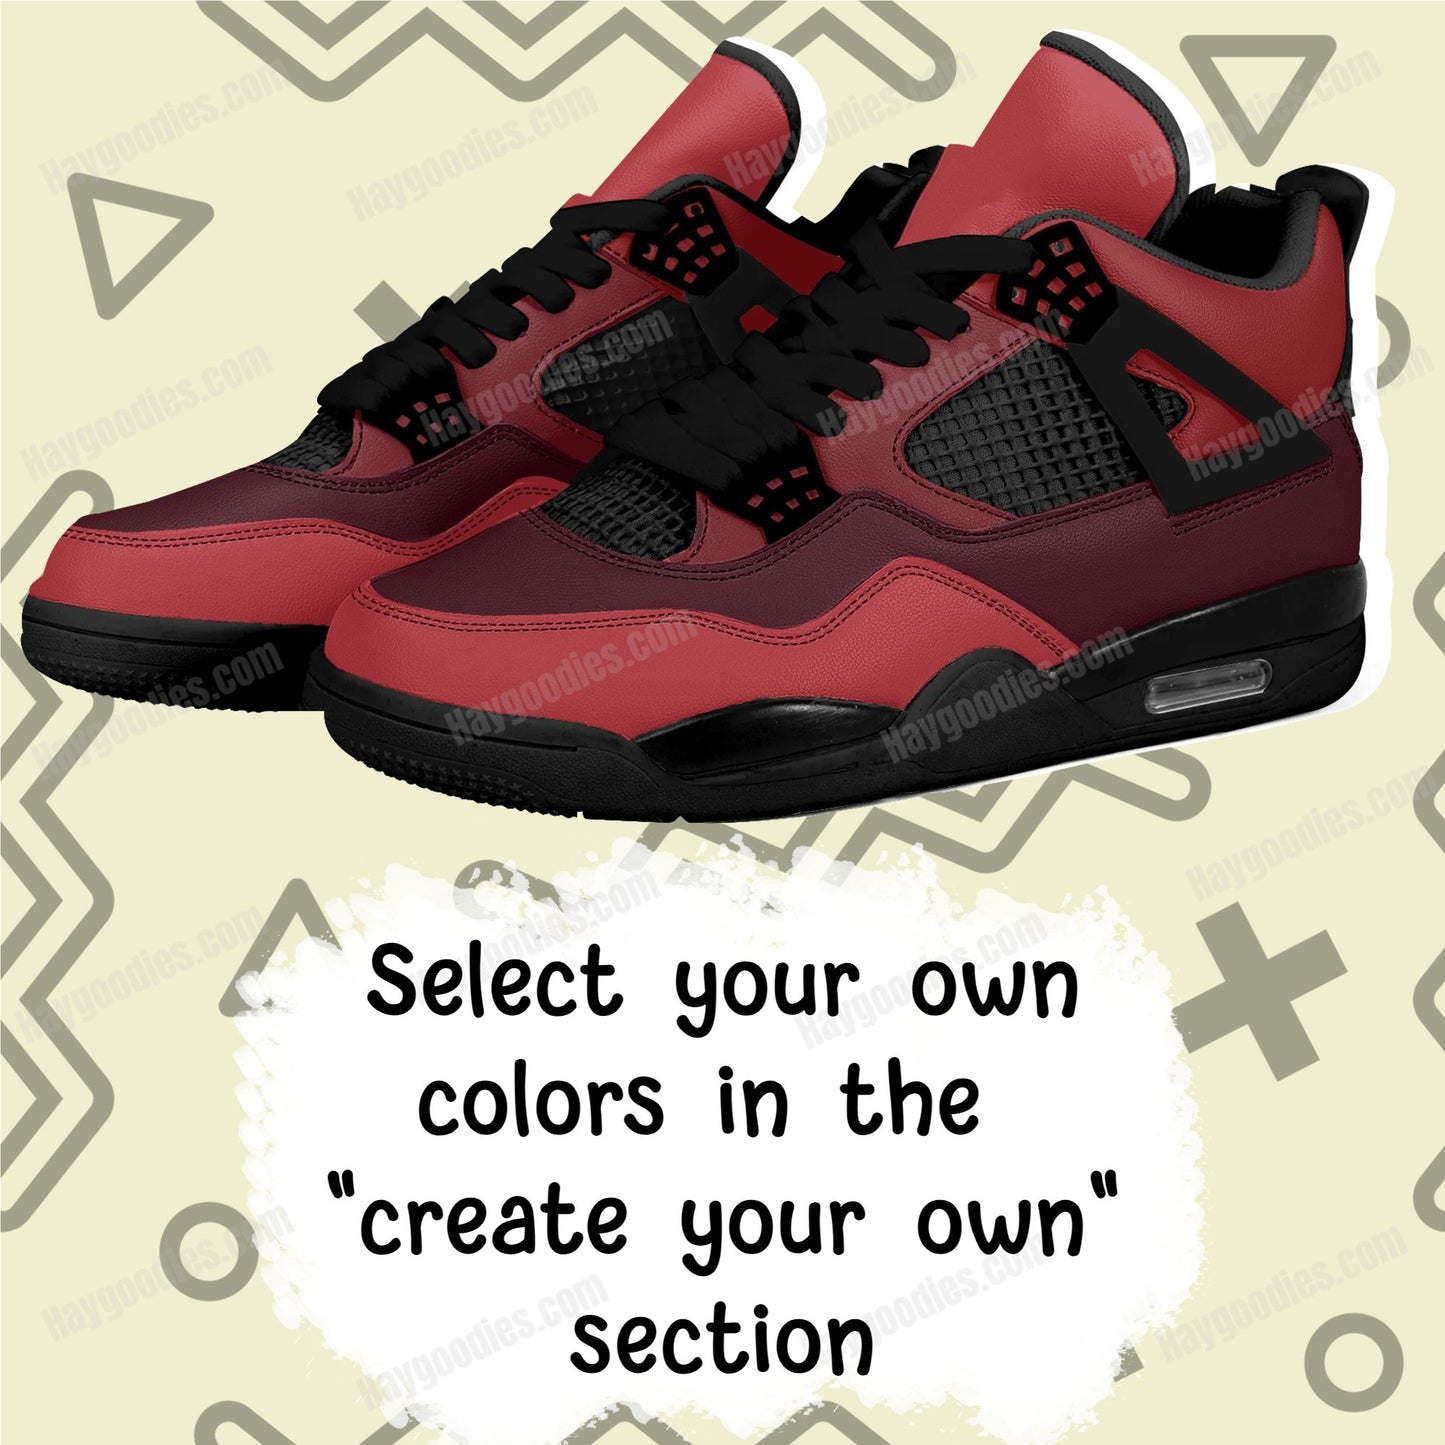 Red Color Mix Low Top Retro J4 Style Sneakers